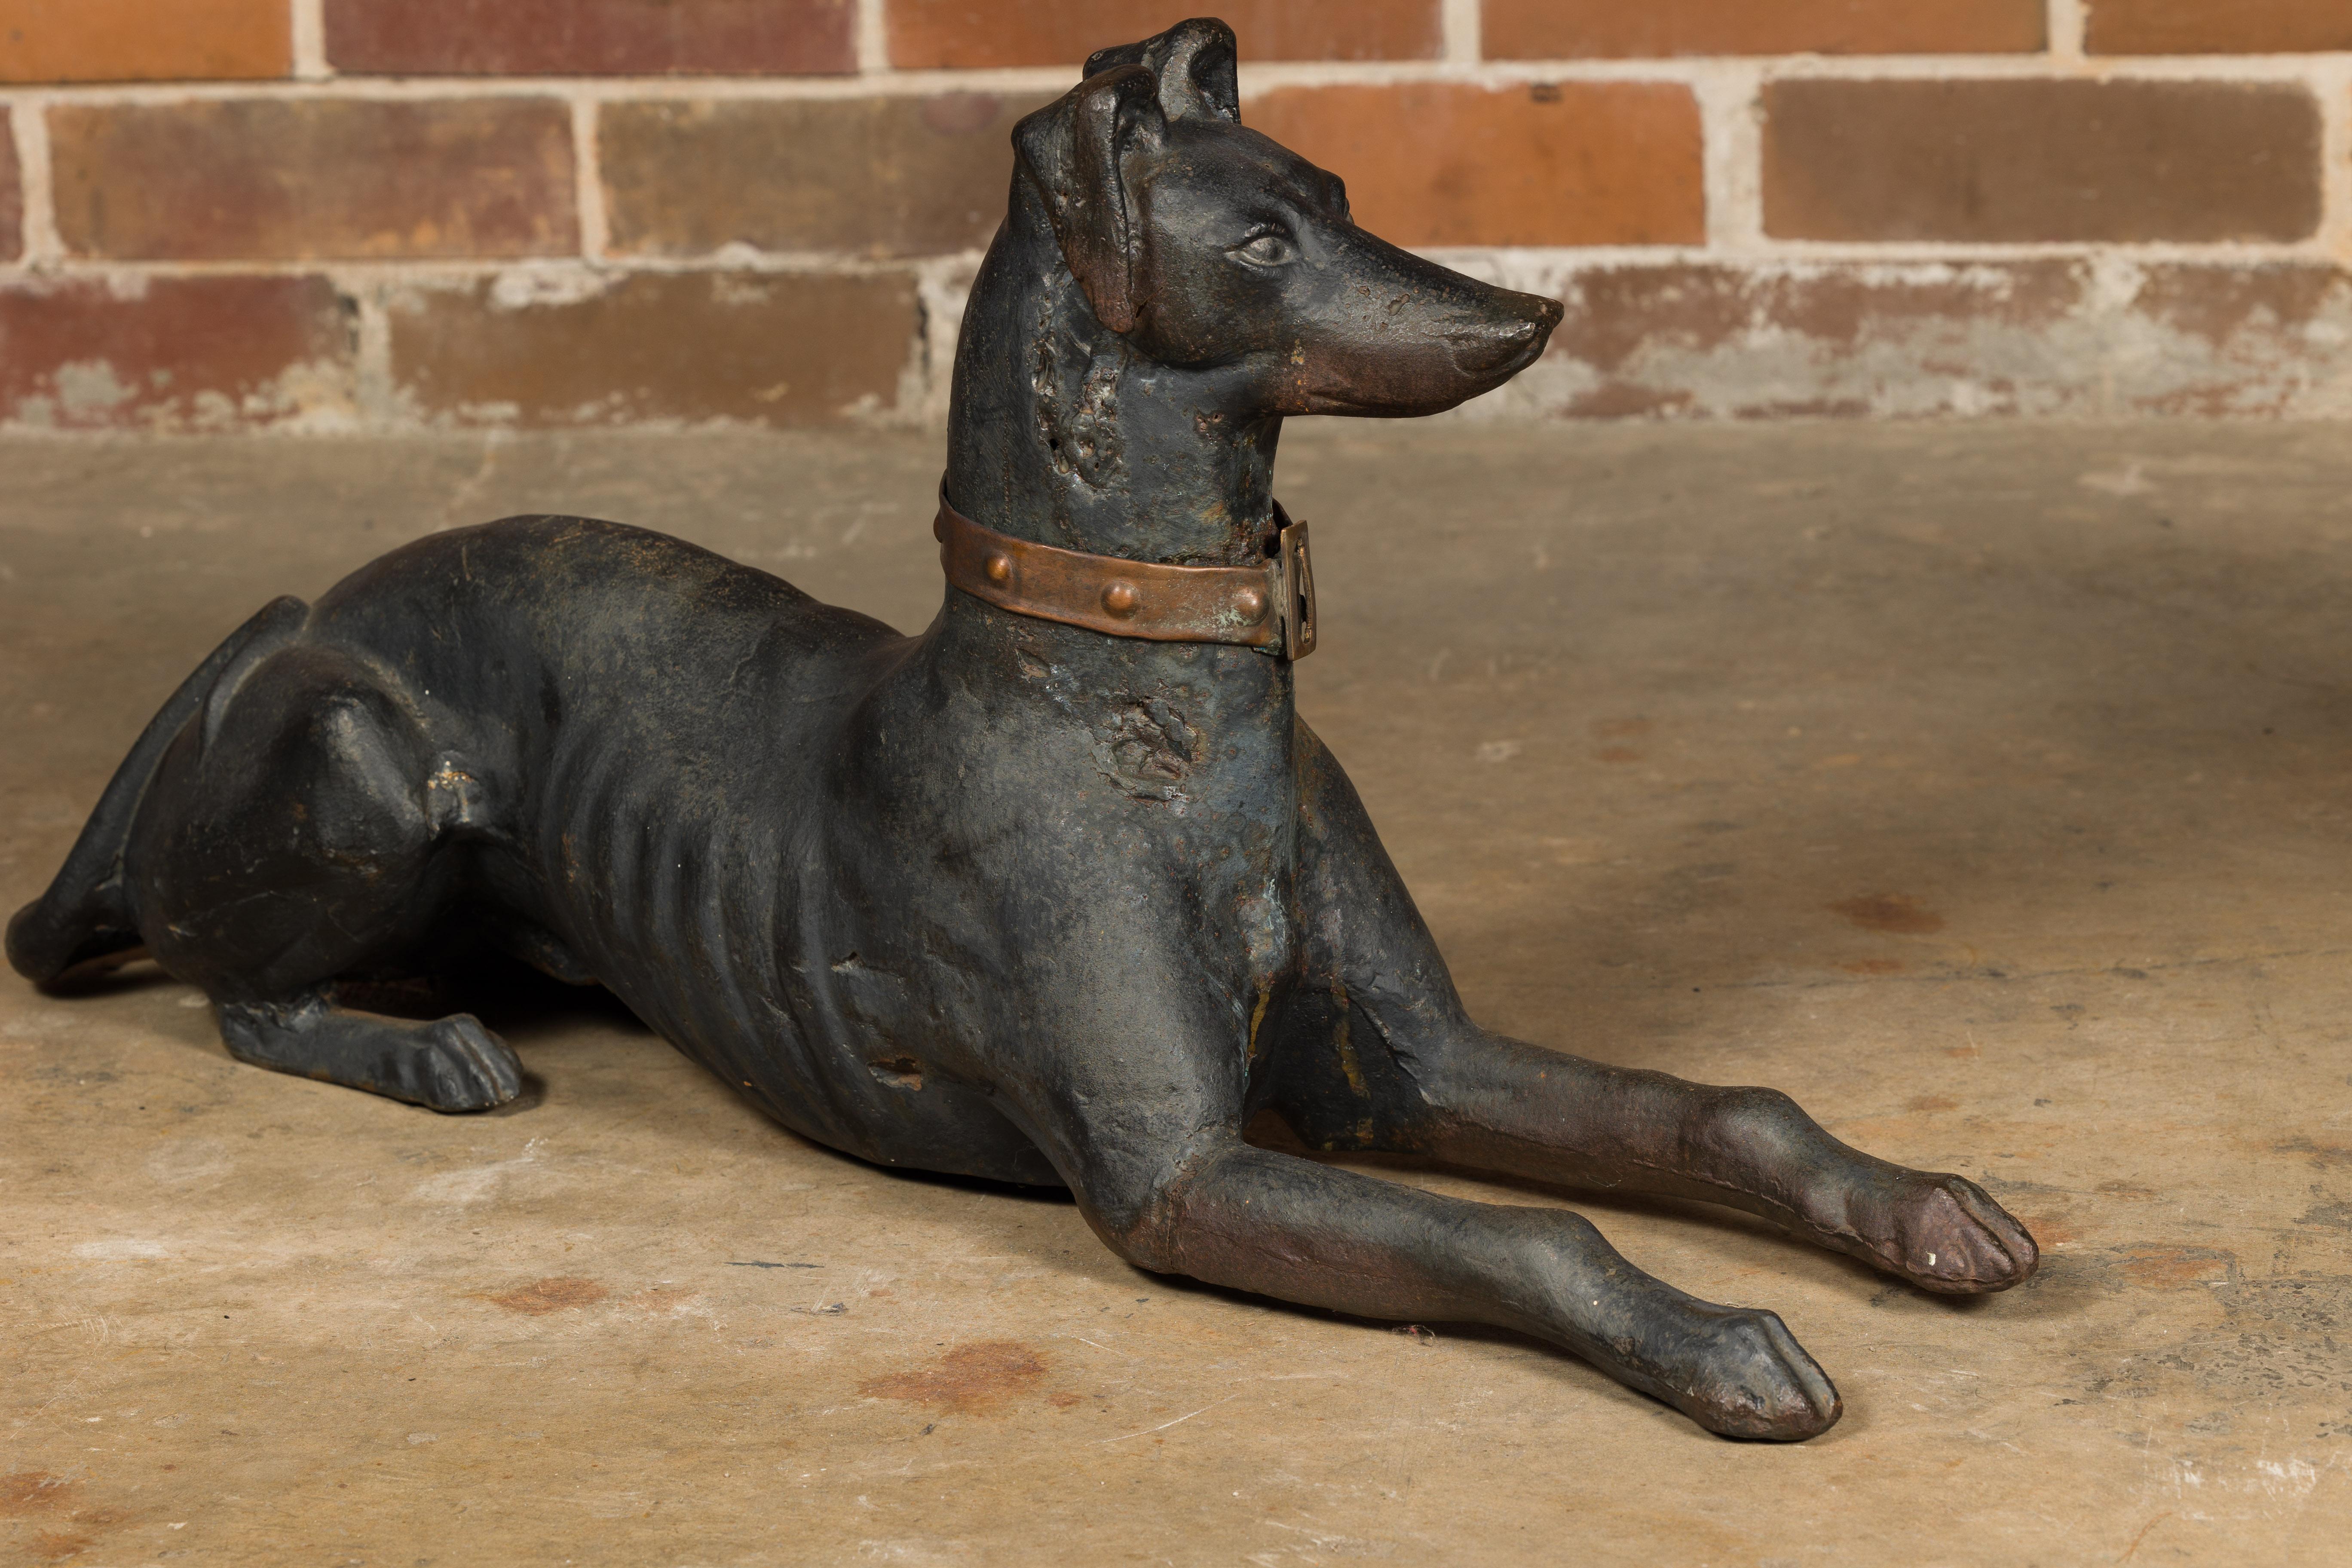 American J.W Fiske Iron Greyhound Dog Sculptures, Late 19th Century New York, a Pair For Sale